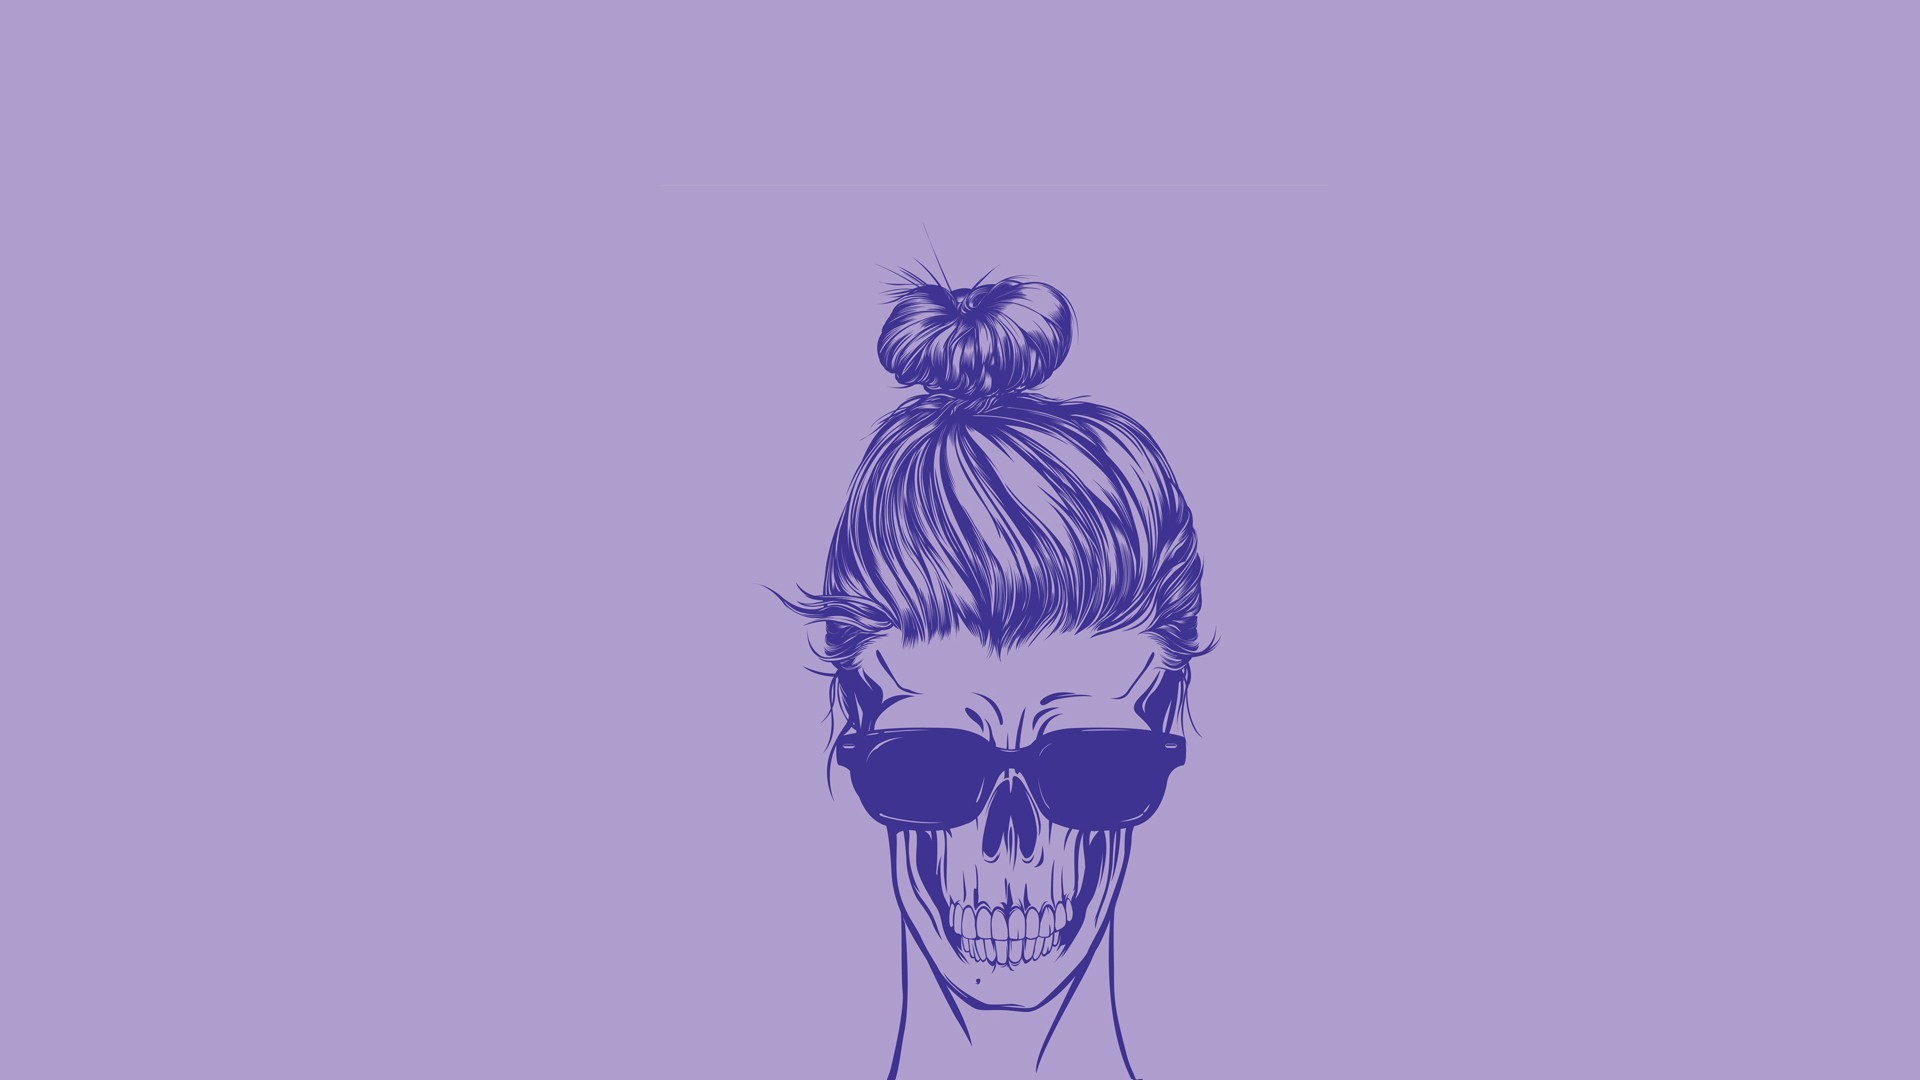 General 1920x1080 skull minimalism artwork glasses simple background frontal view hairbun women horror women with shades sunglasses